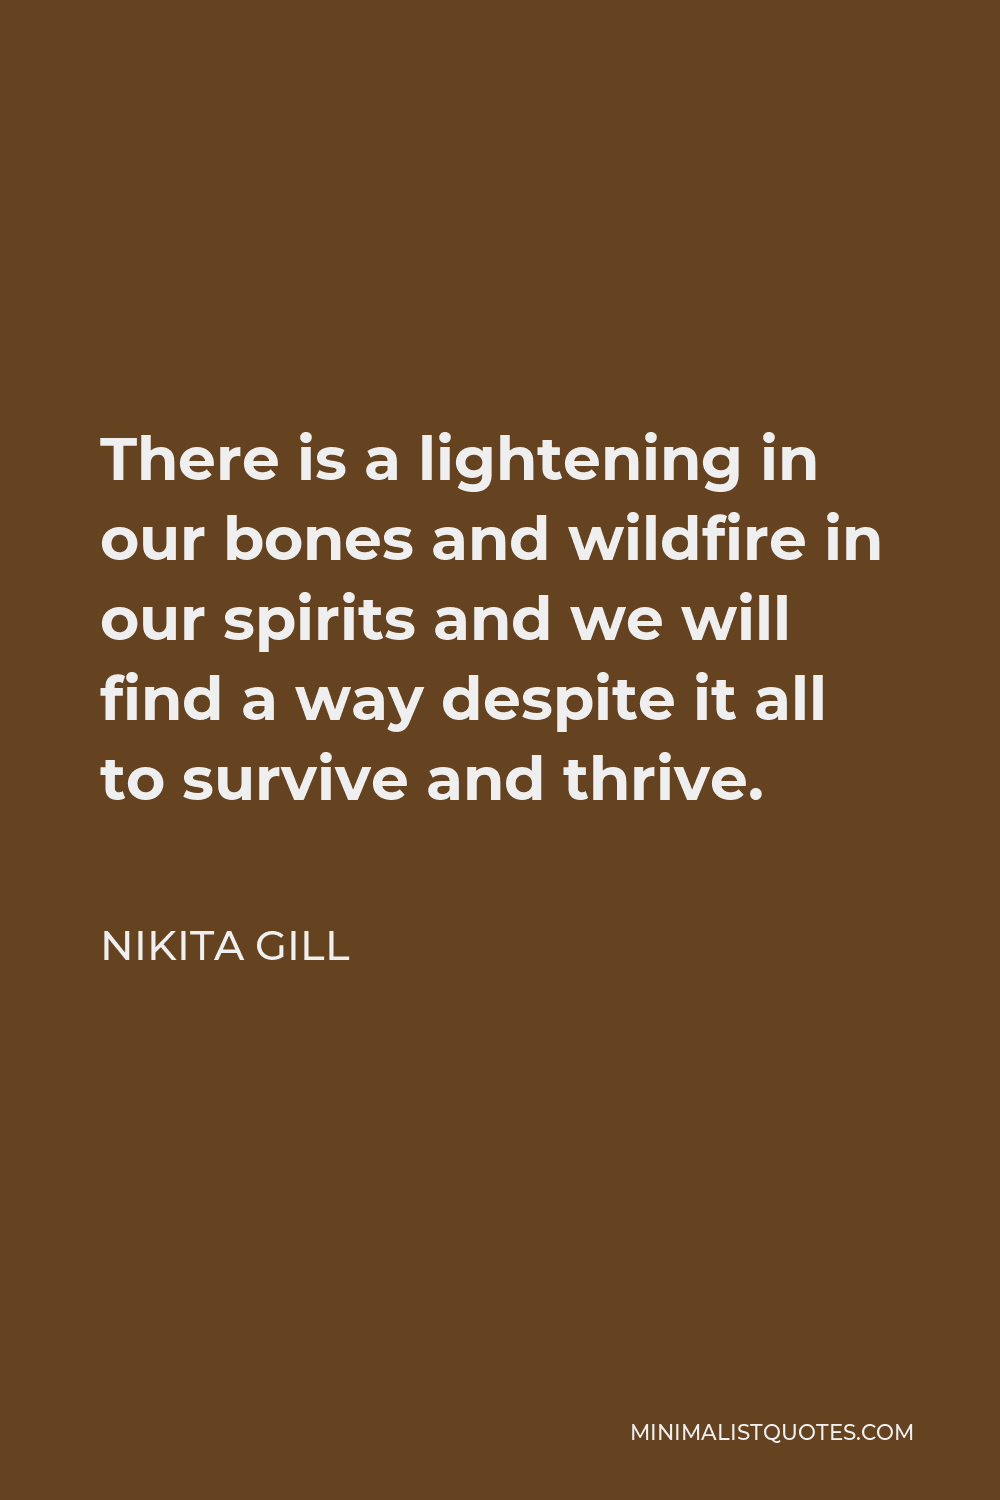 Nikita Gill Quote - There is a lightening in our bones and wildfire in our spirits and we will find a way despite it all to survive and thrive.